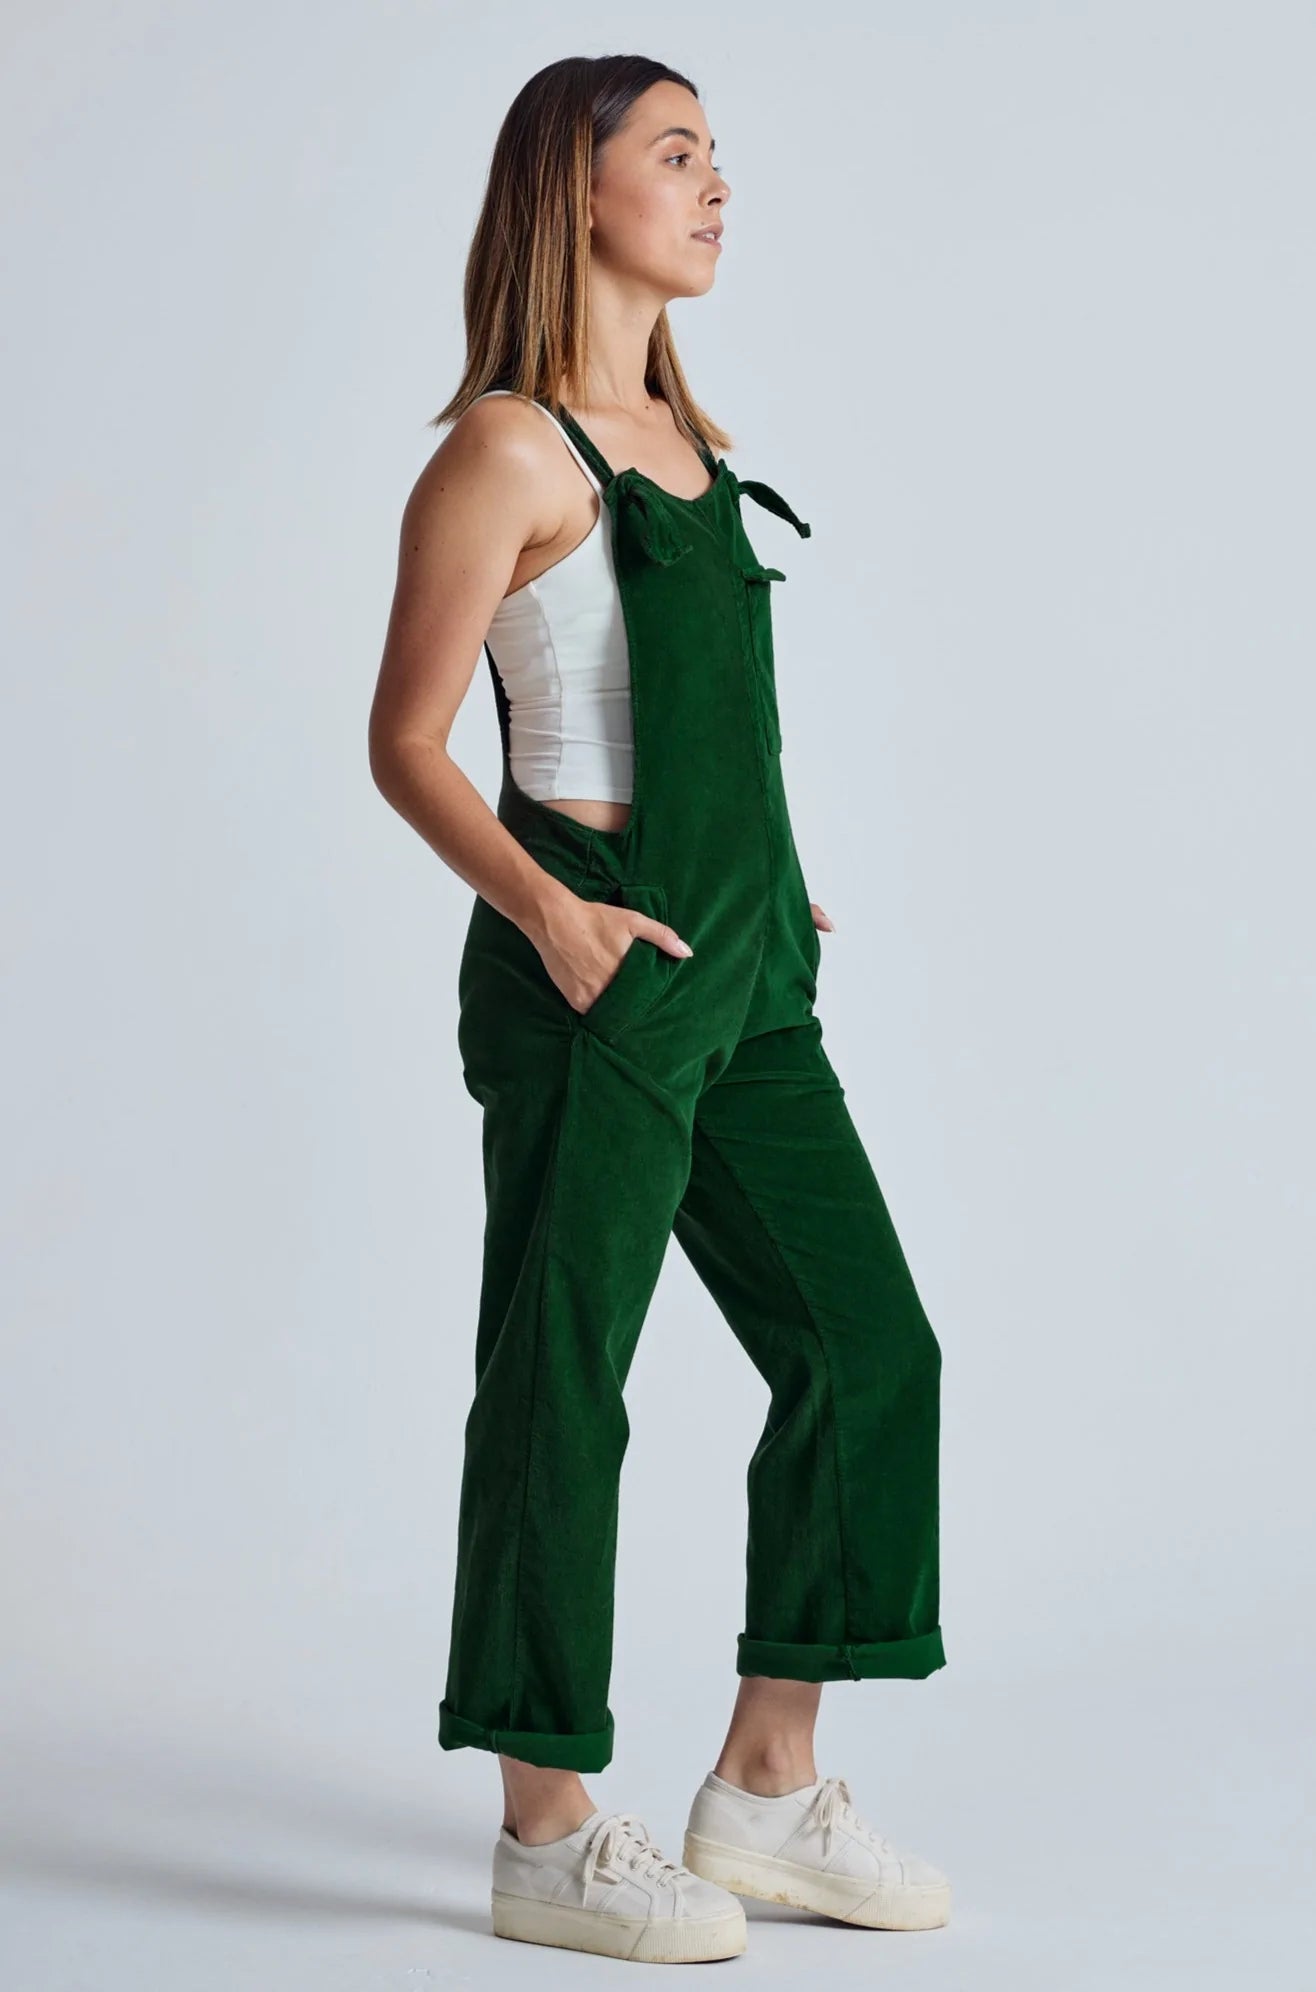 MARY-LOU Winter Green - Organic Cotton Dungarees by Flax & Loom